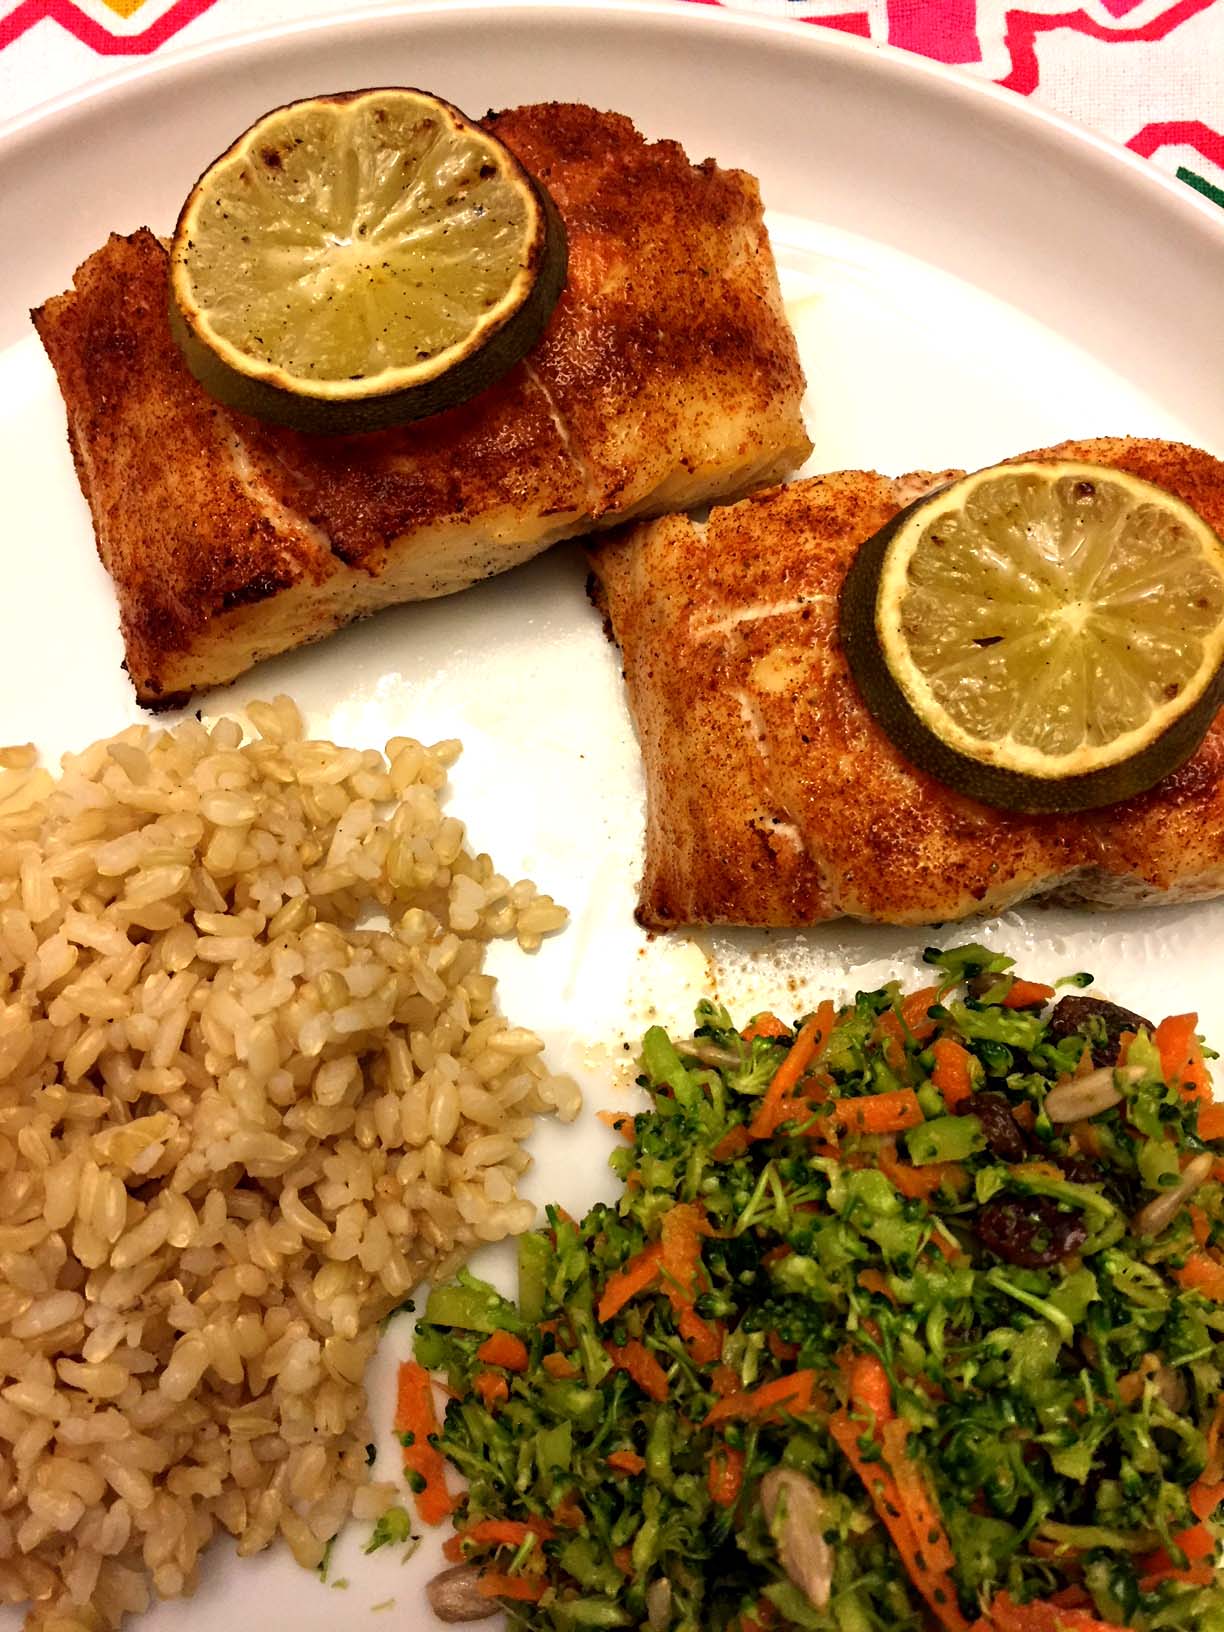 Baked Red Snapper Fillets With Chili And Lime Melanie Cooks,Recipe For Sangria With Fruit